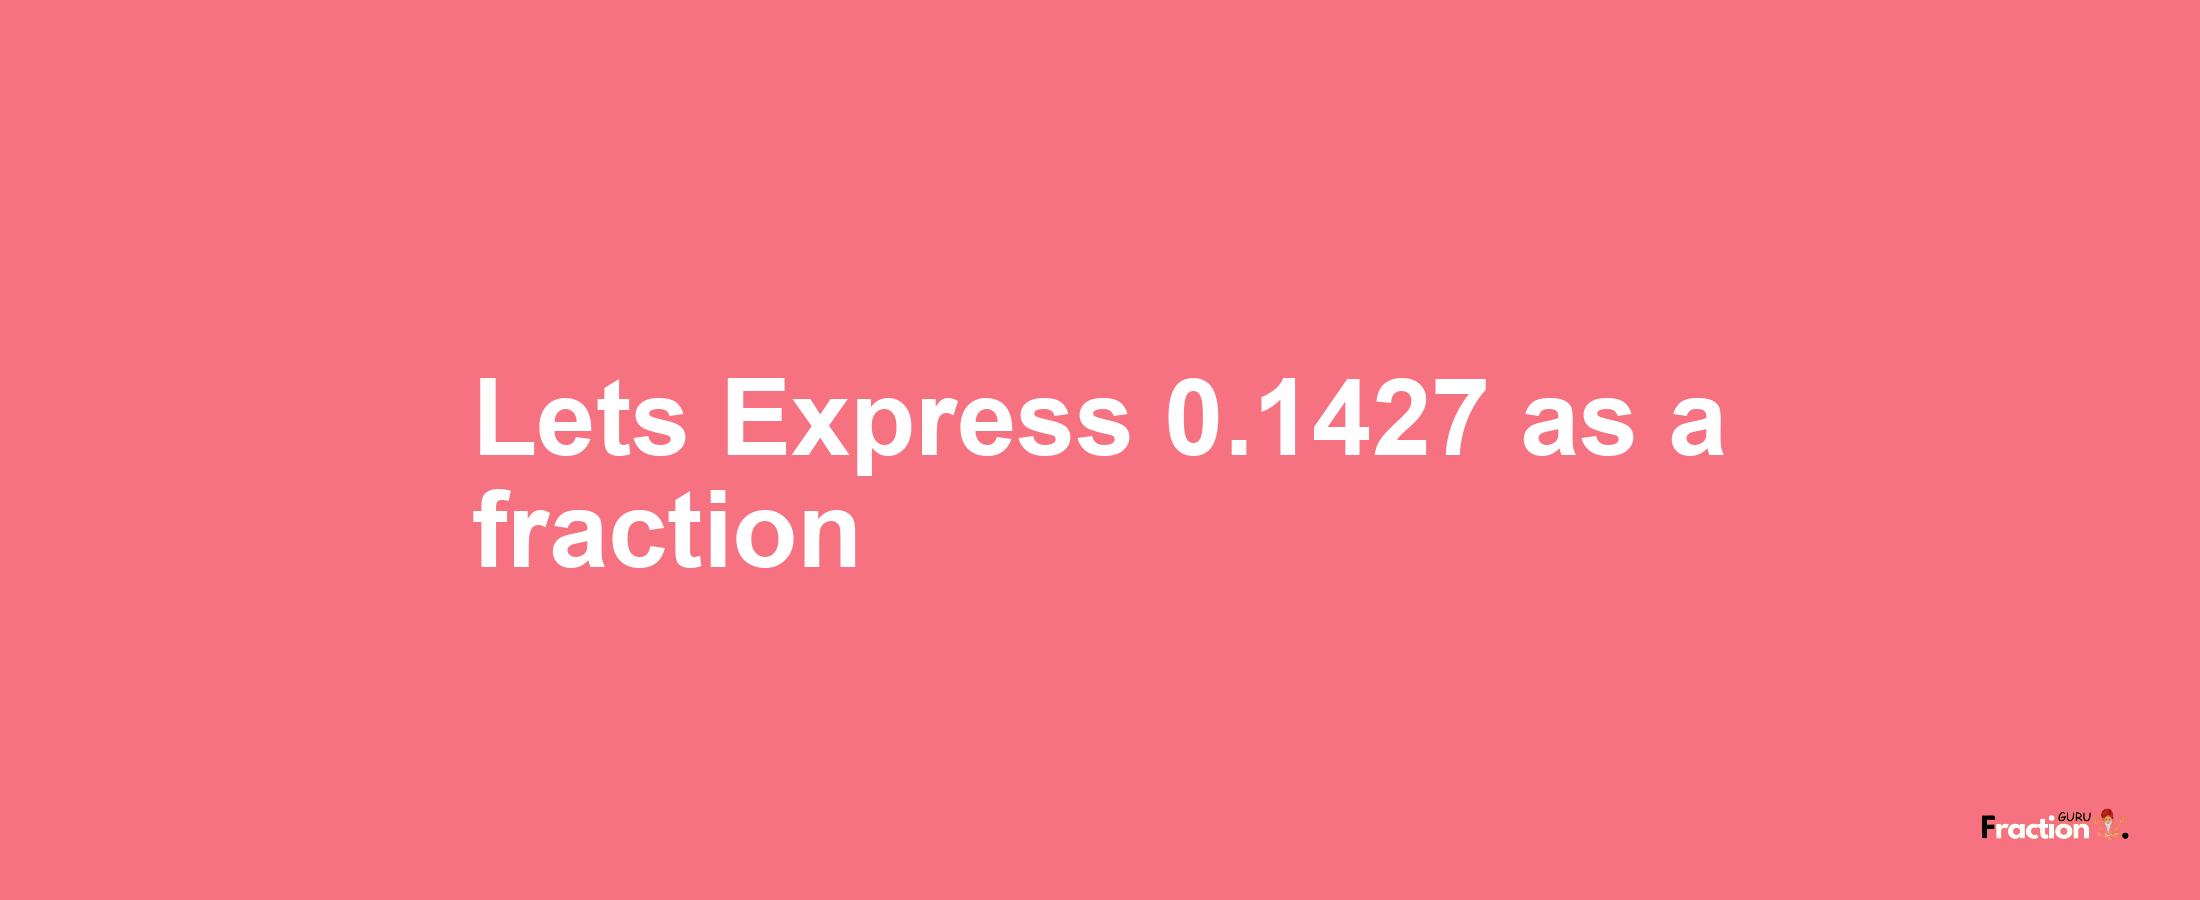 Lets Express 0.1427 as afraction